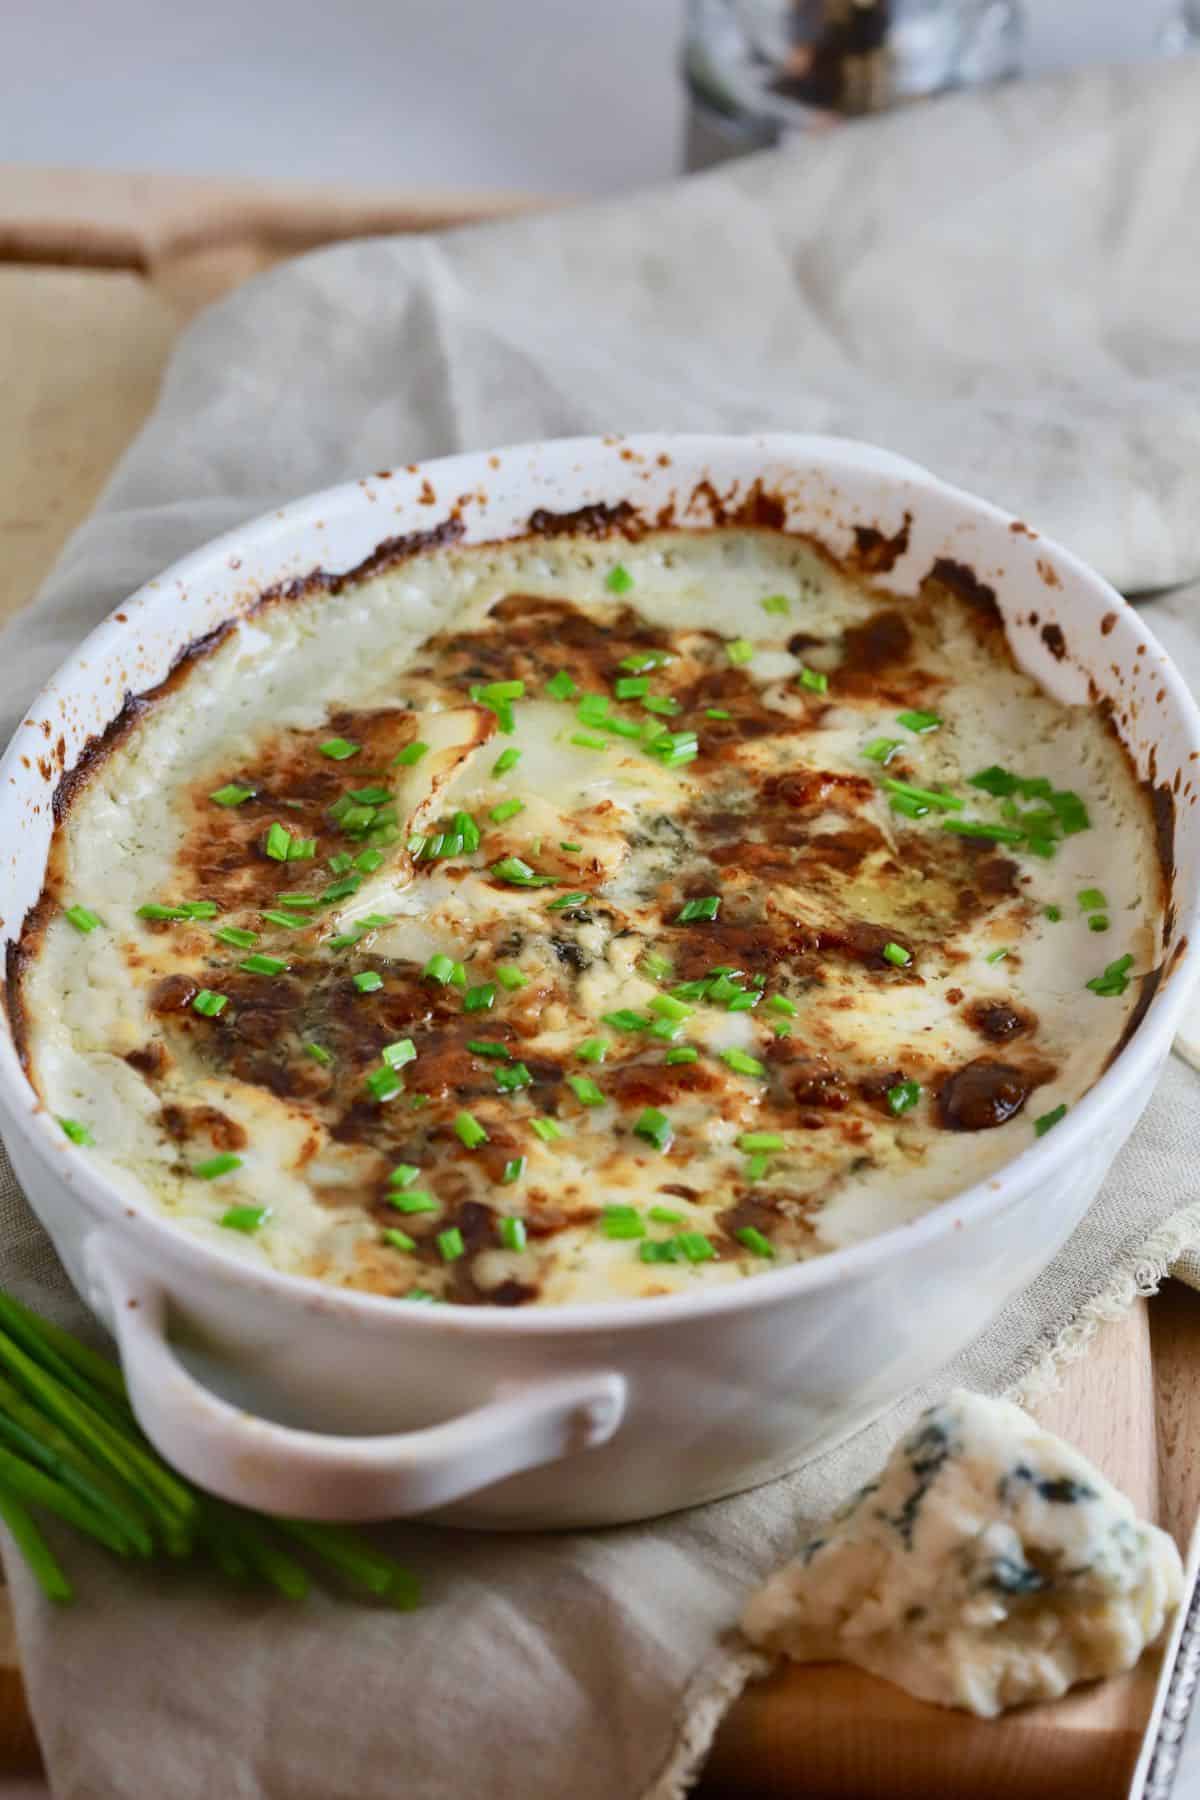 Cooked Blue Cheese Au Gratin potatoes in a white baking dish.